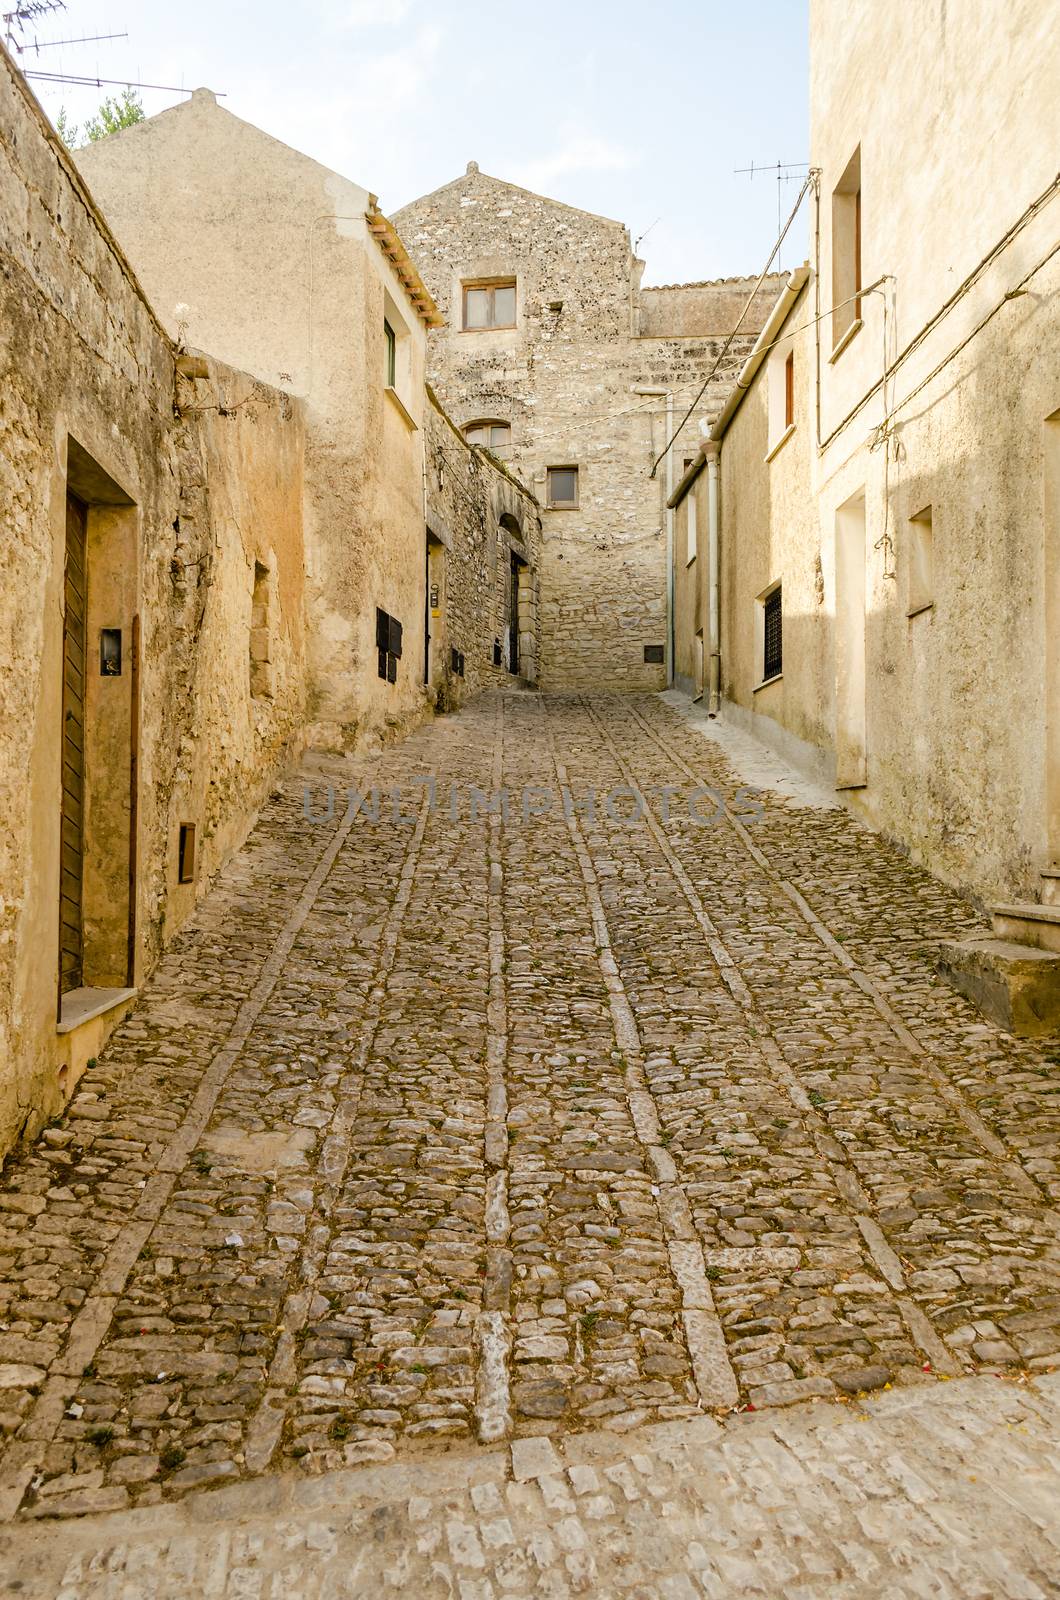 Stone paved ancient medieval street in the town of Erice, Sicily, Italy